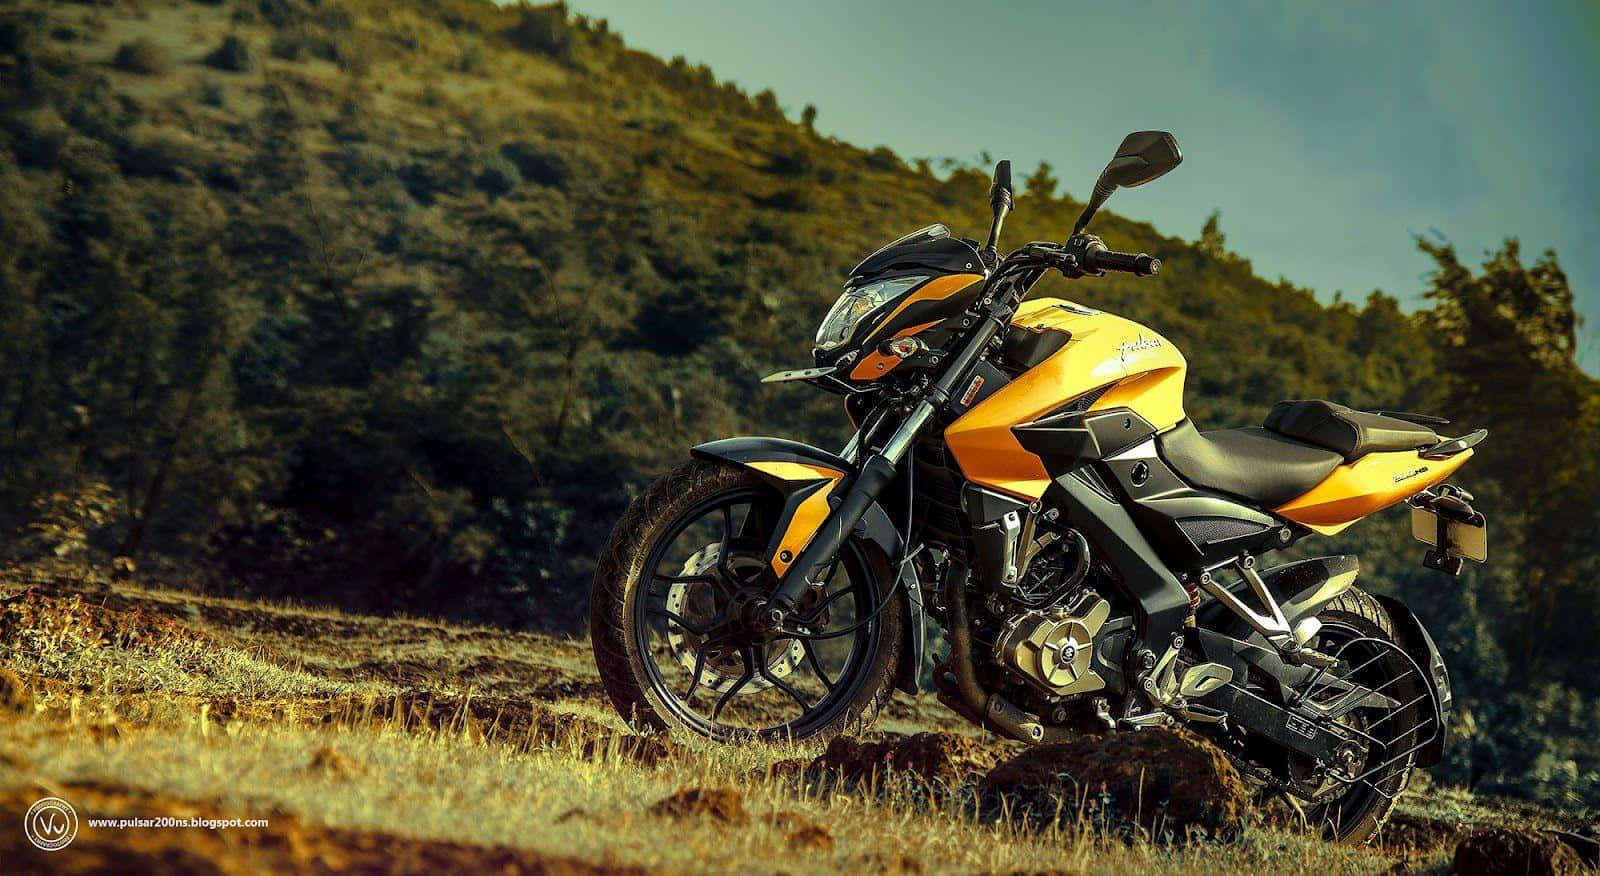 Prepare to Hit the Open Roads With the TVS NS 200